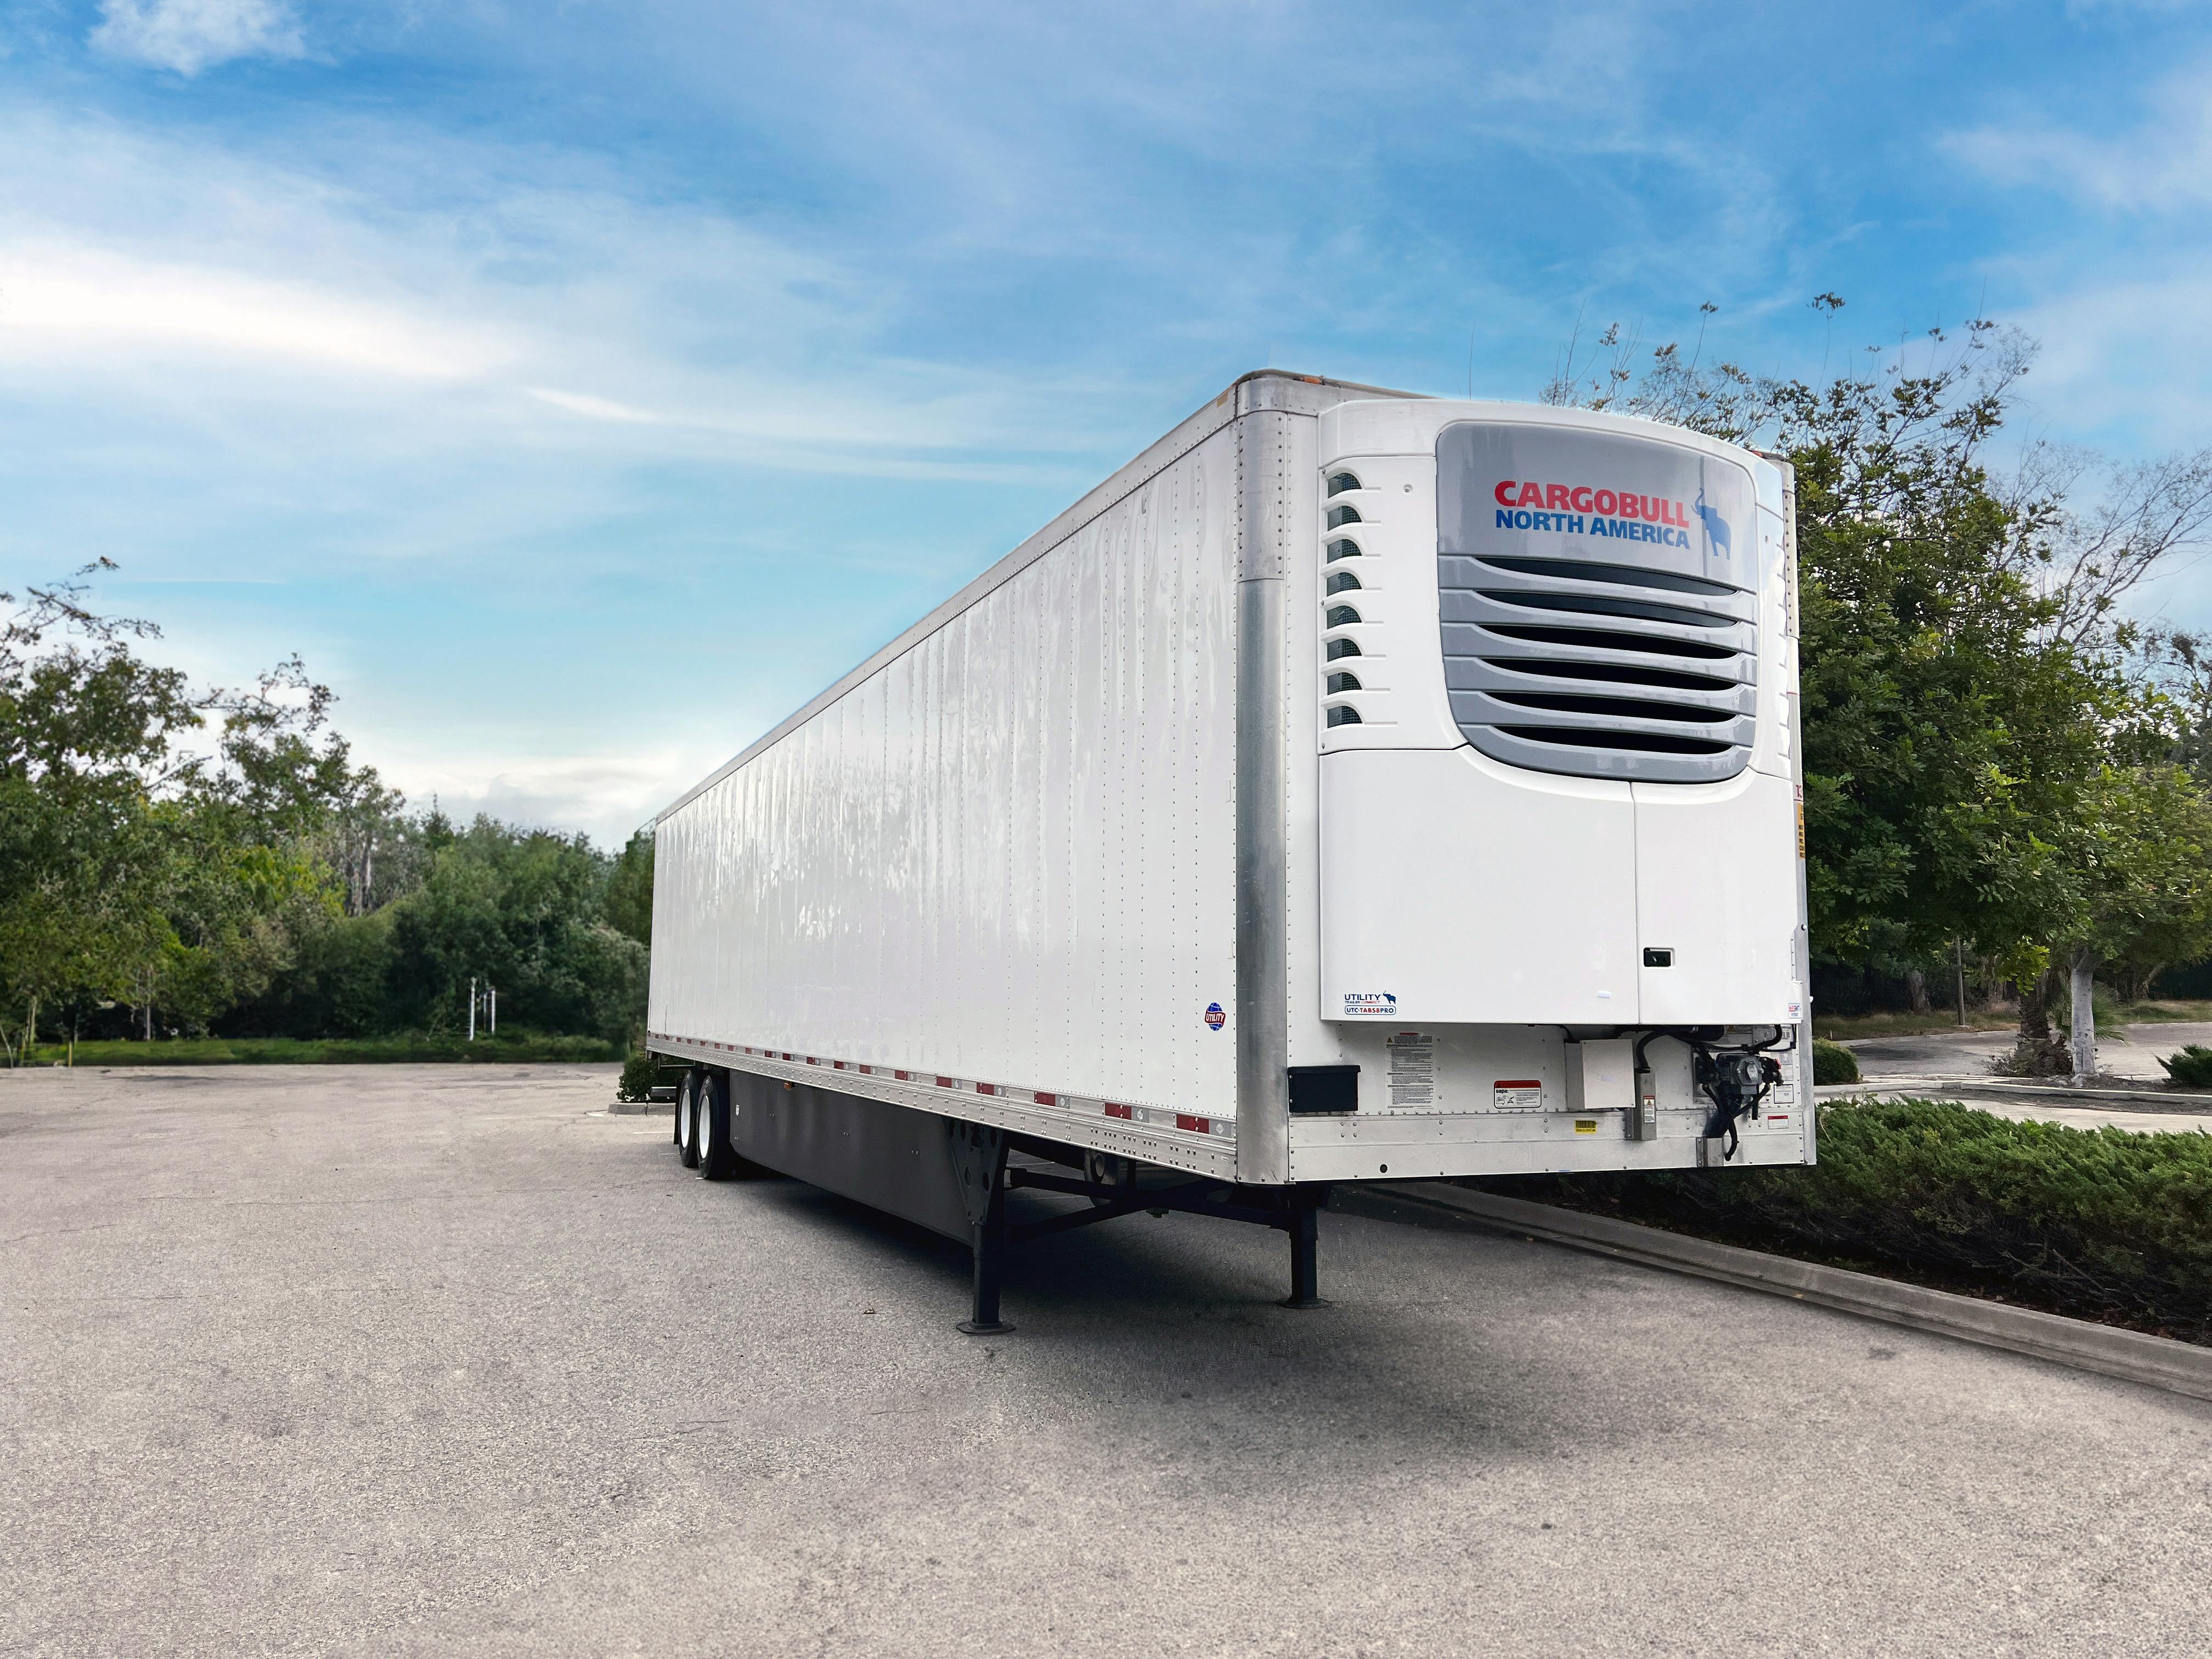 Groundbreaking Hybrid Refrigeration Units Now Available from Utility Trailer Throughout North America